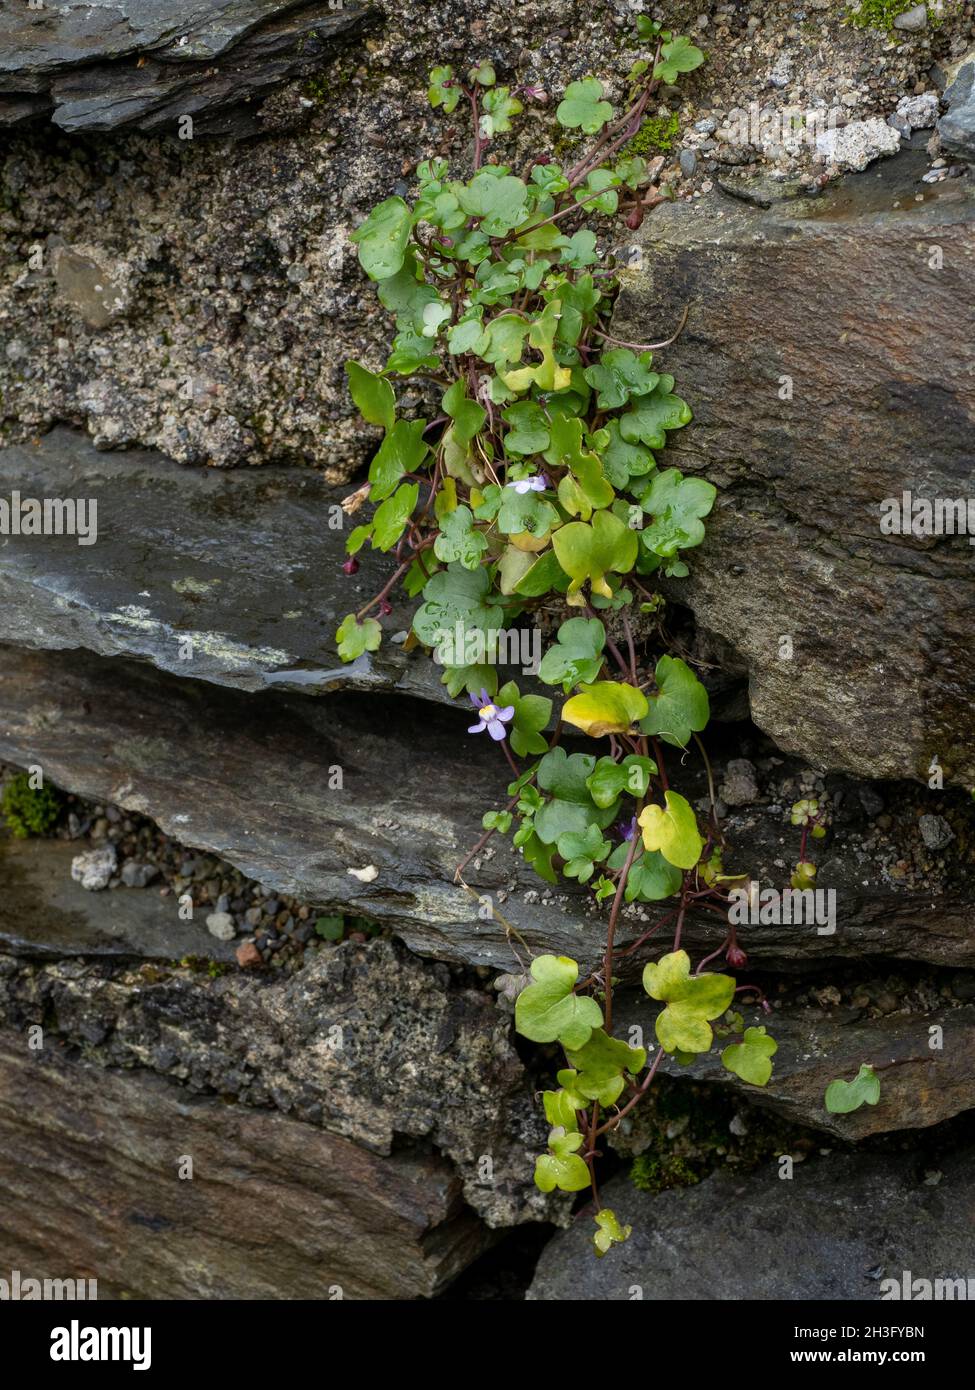 Ivy-leaved Toadflax with small flowers growing between rocks. Stock Photo